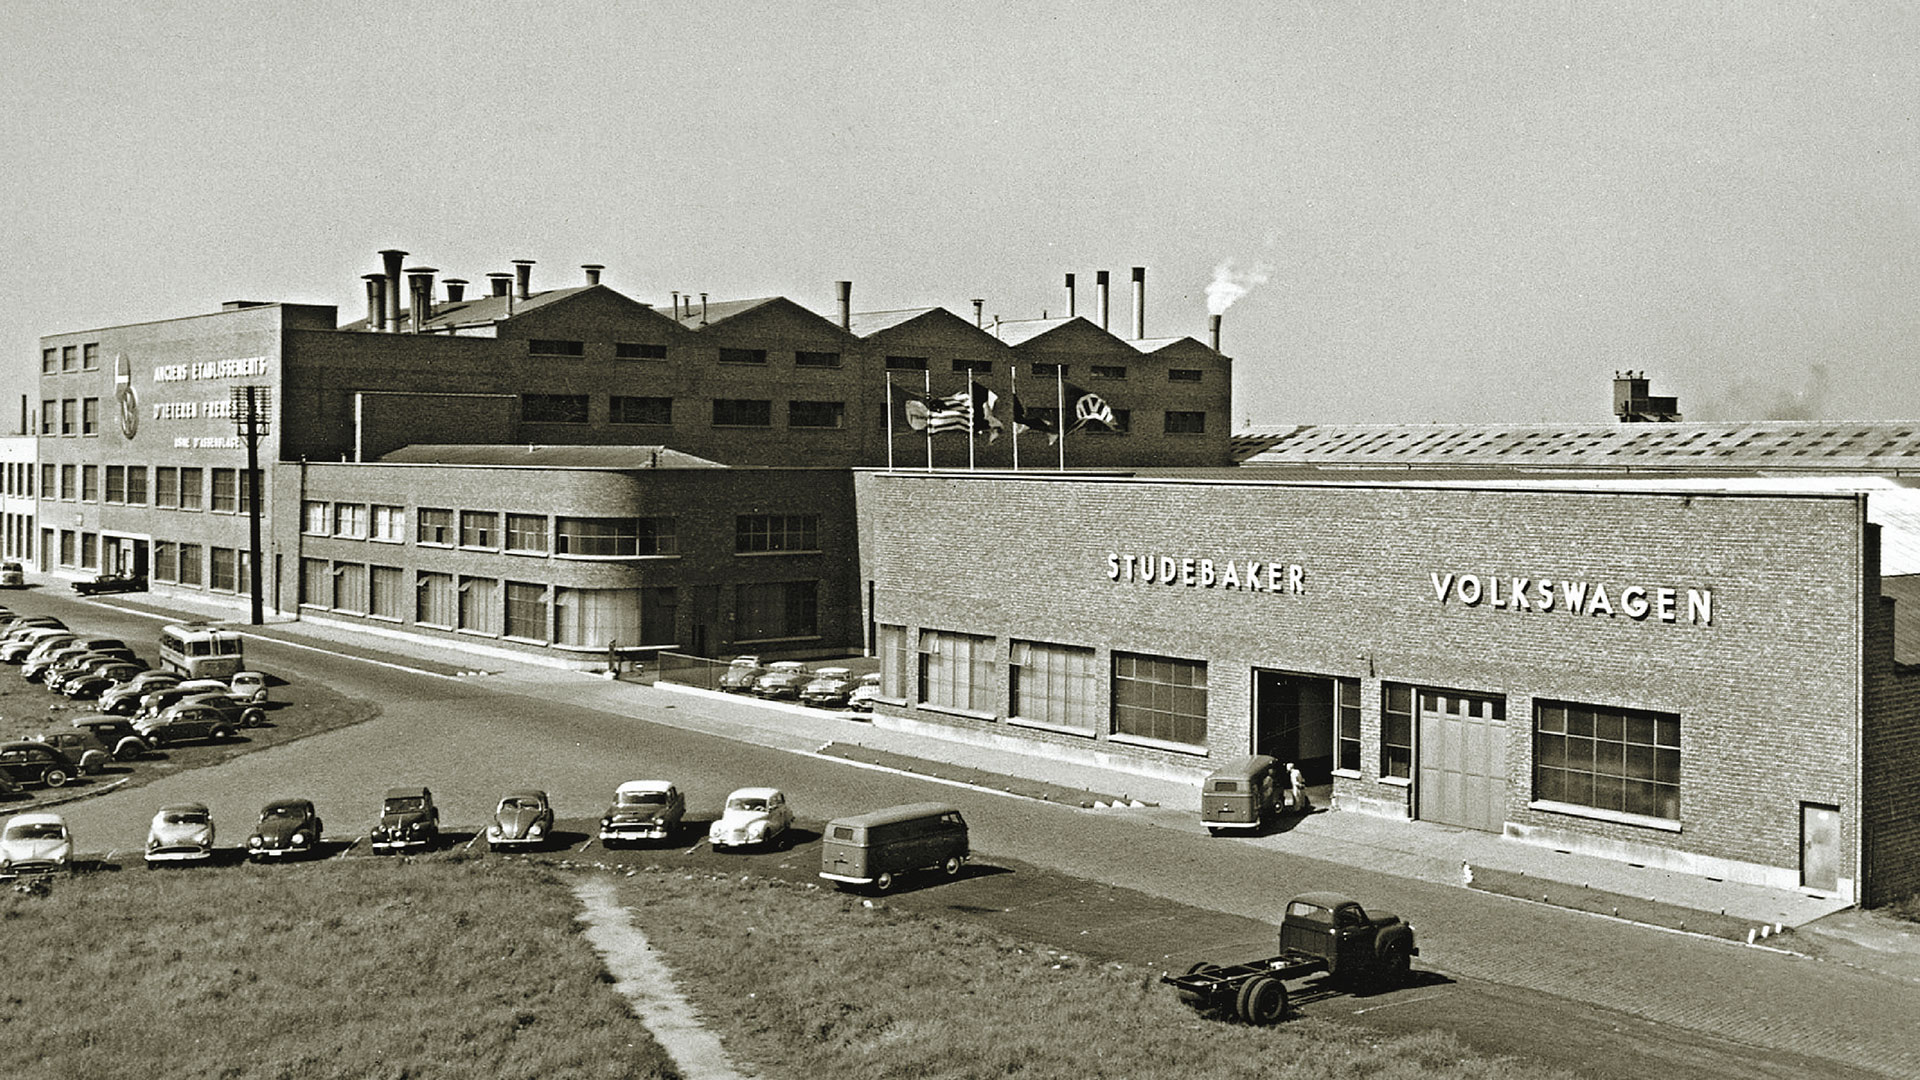 In this black and white photo you can see the old Volkswagen factory